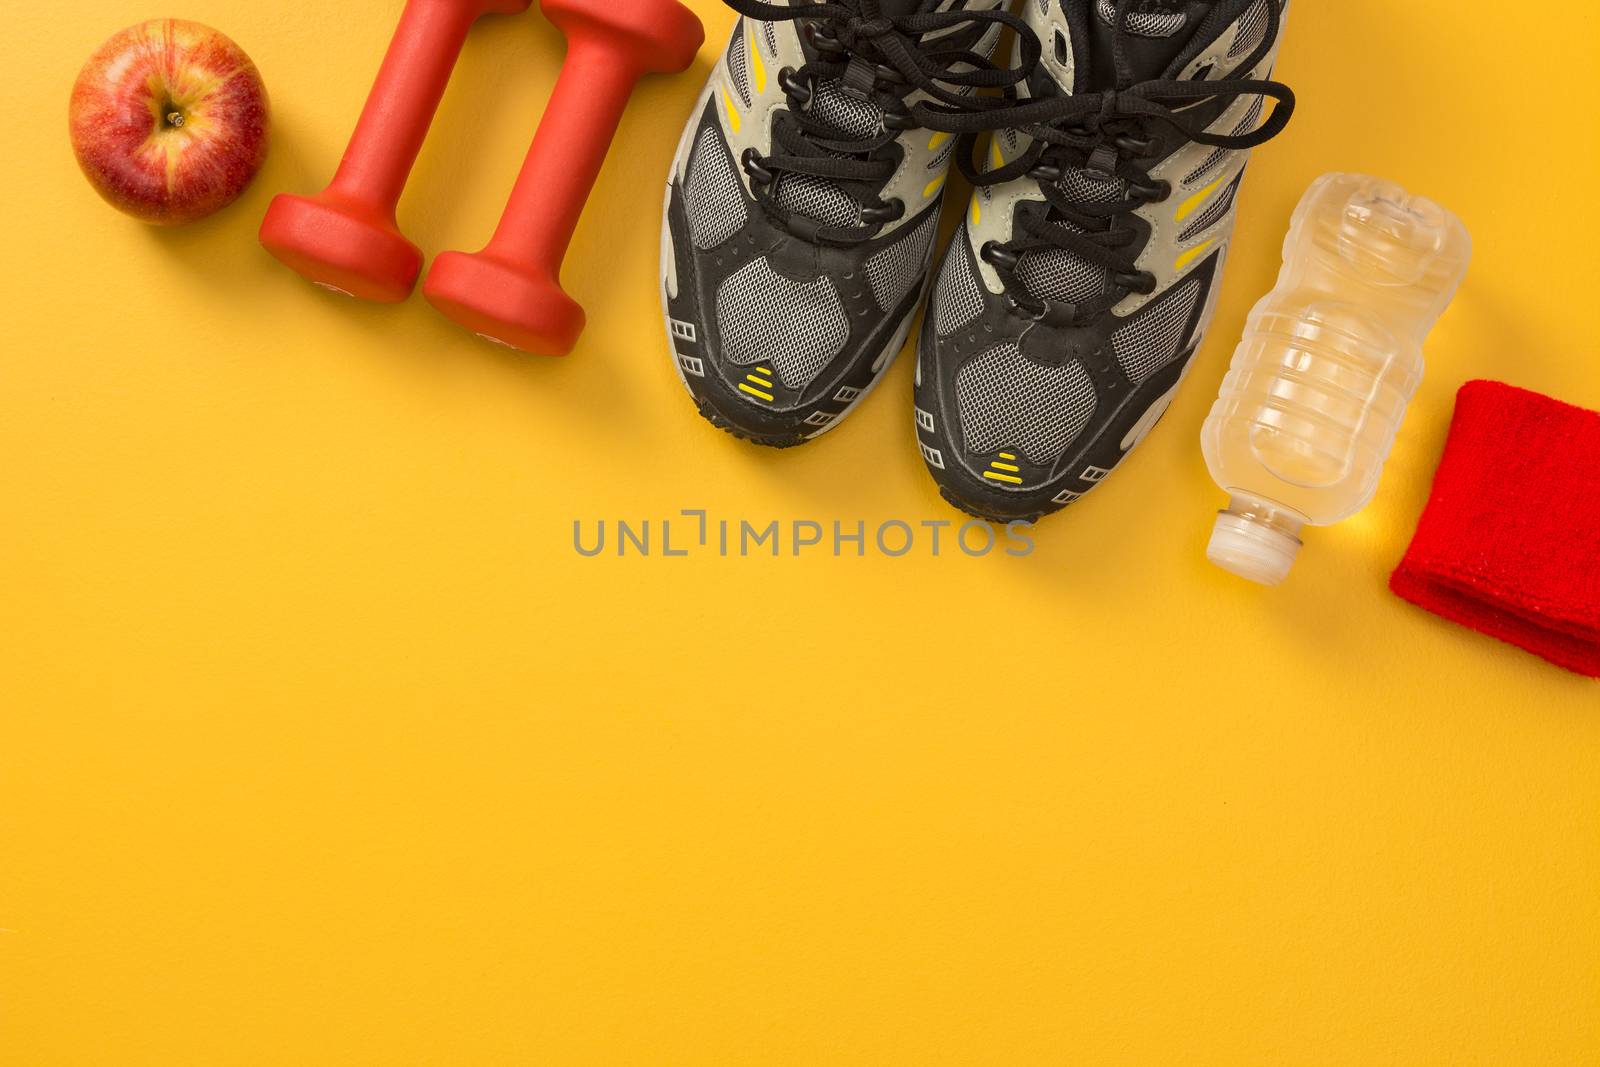 Sport shoes, dumbbells, apple, water bottle and wrist bands. Fitness still life, on yellow background with copy space.